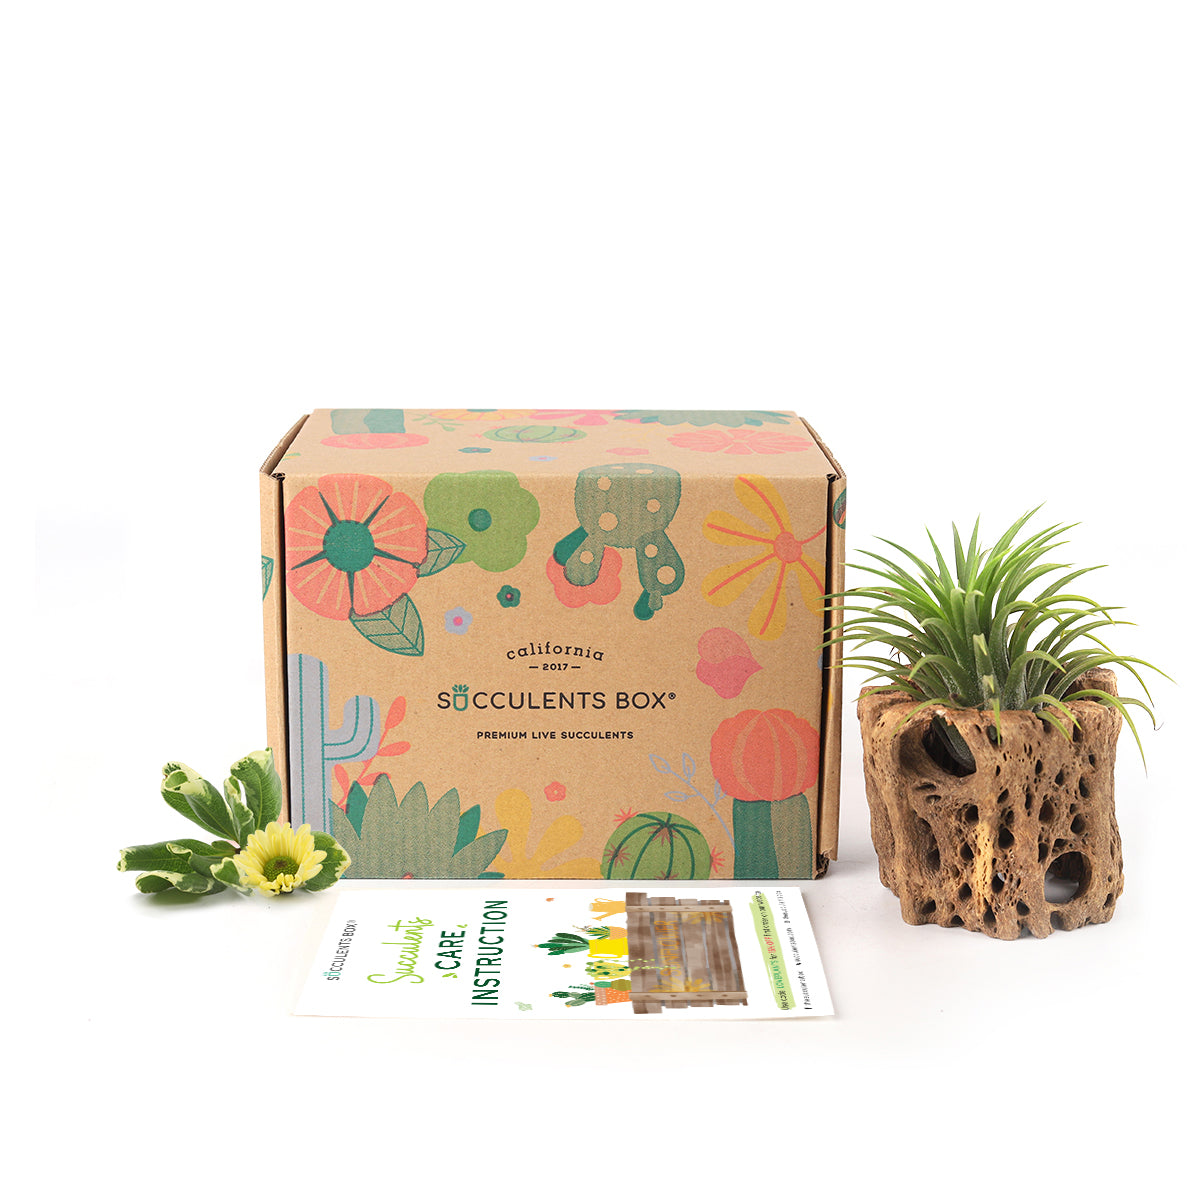 Gift 1 Airplant 1 Accessory/ month - 3 month subscription